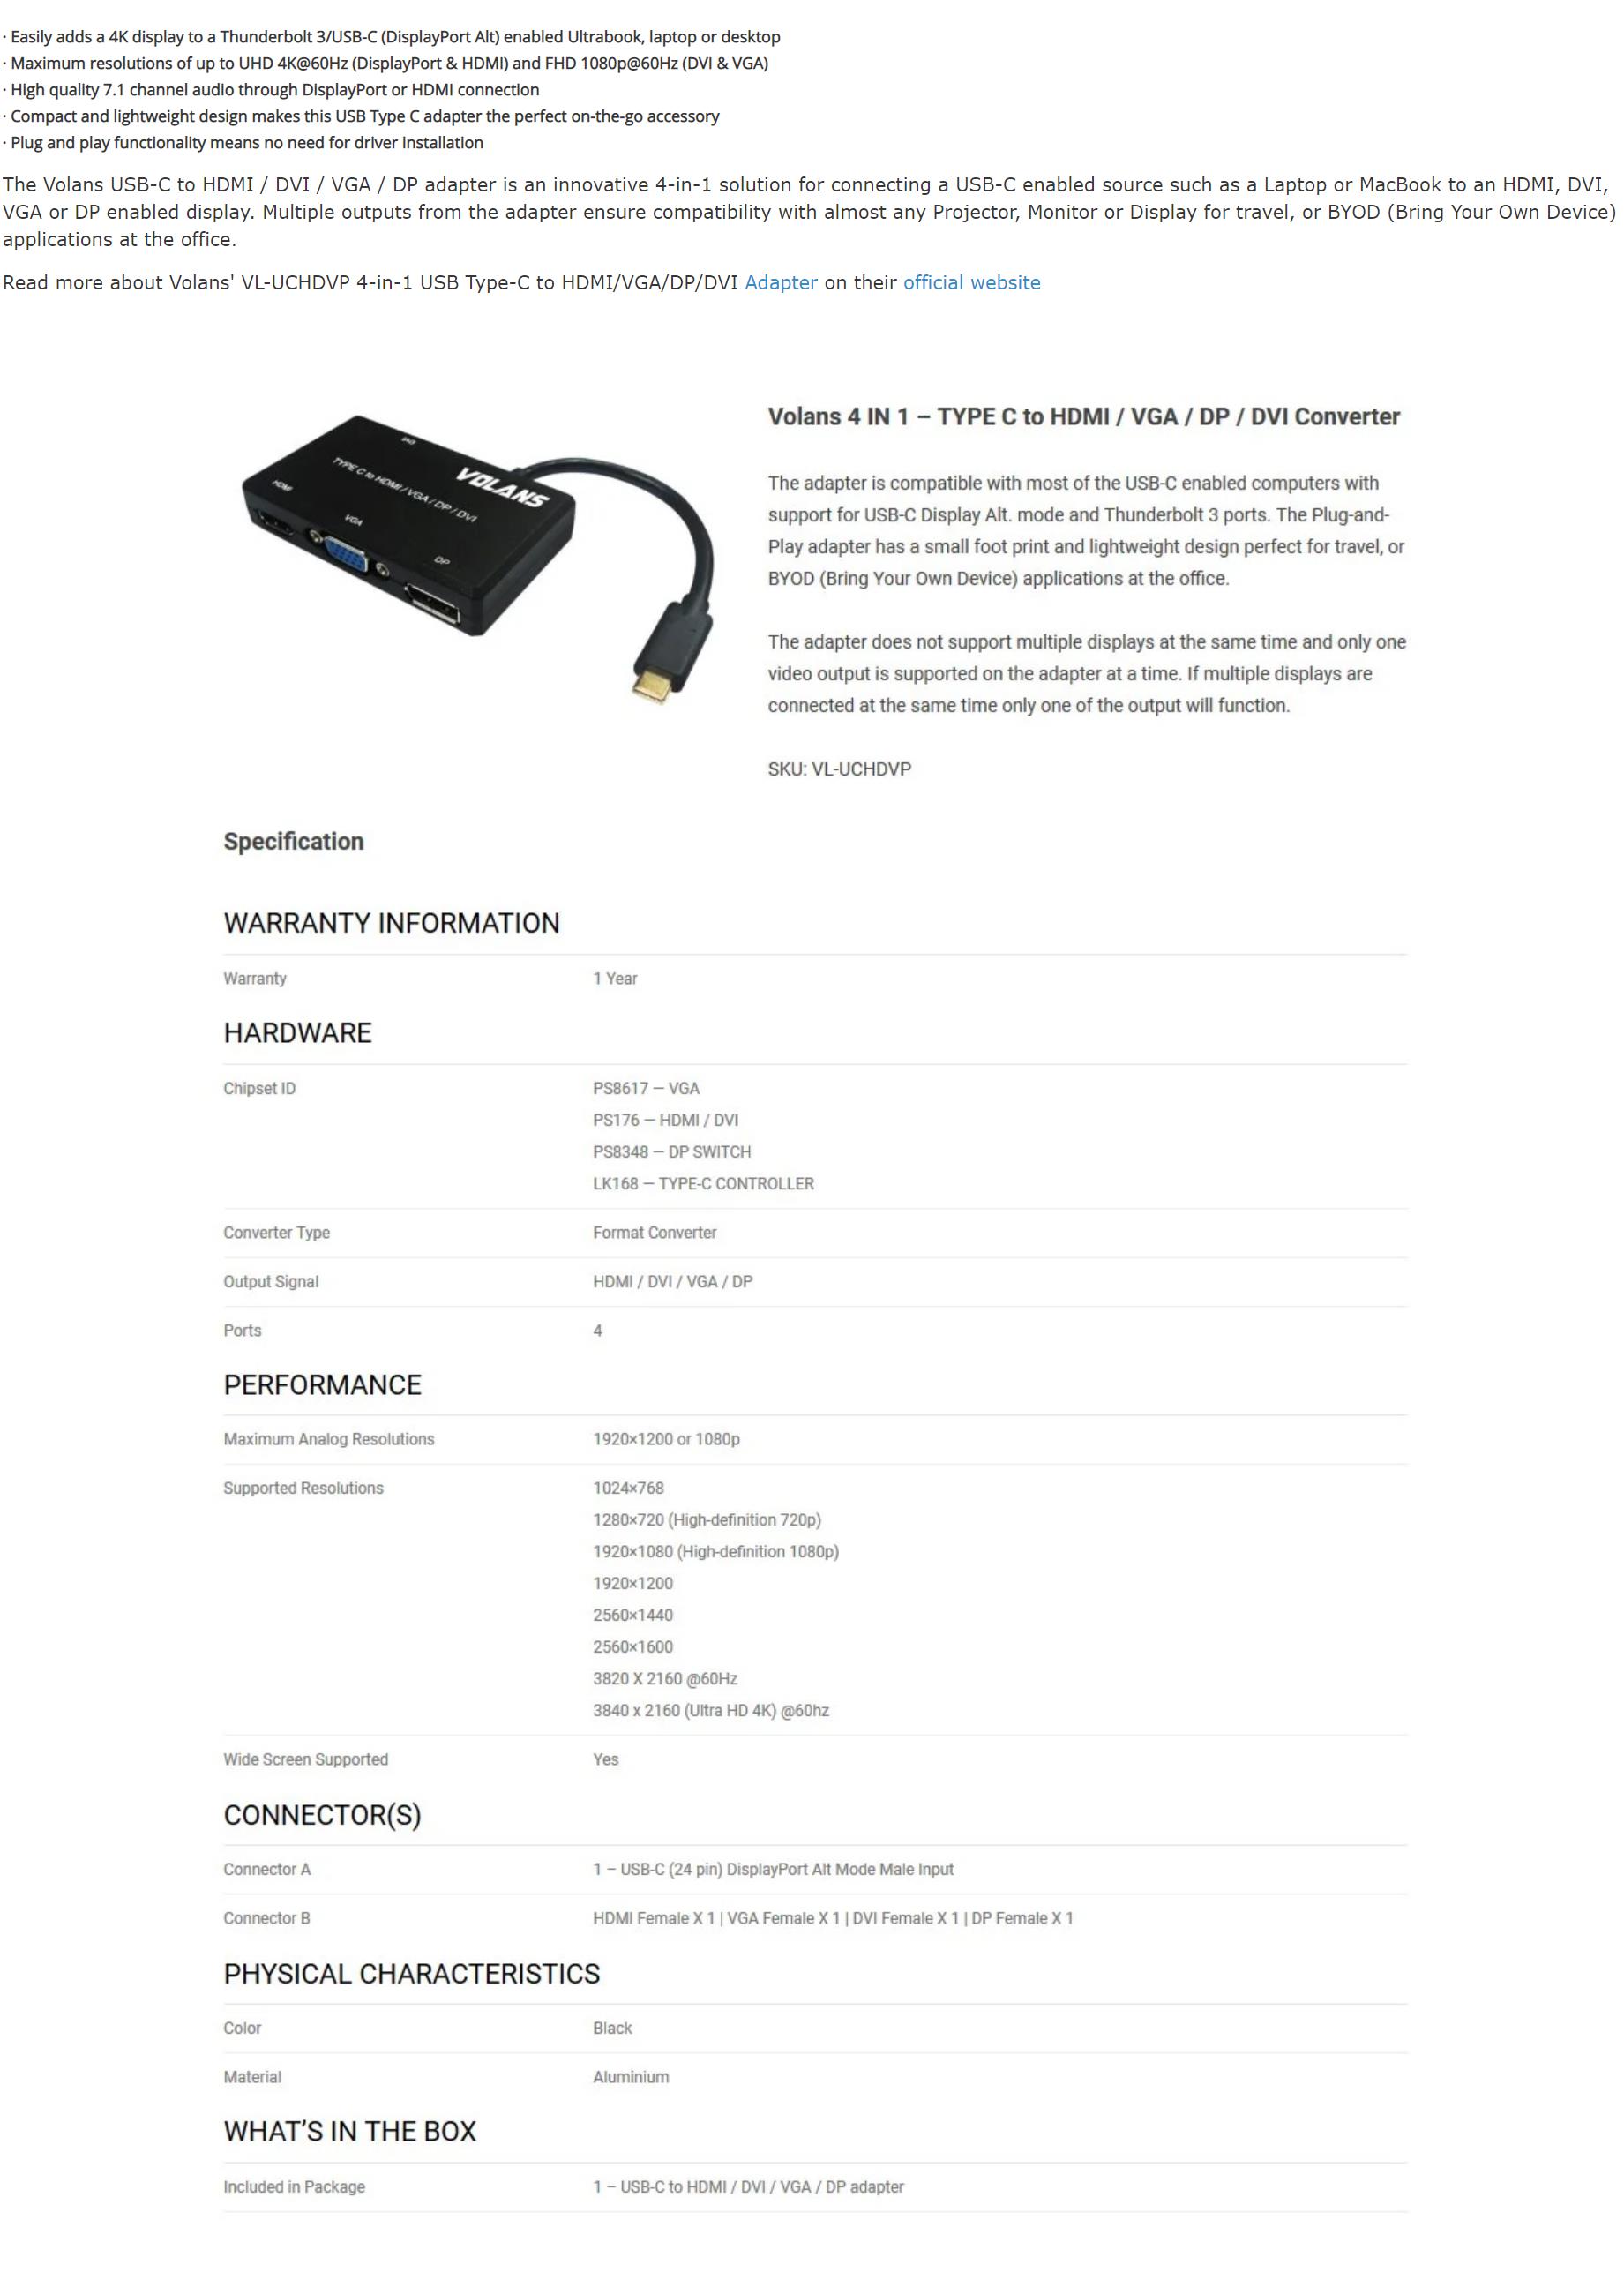 A large marketing image providing additional information about the product Volans 4 in 1 – Type C to HDMI/VGA/DP/DVI Converter - Additional alt info not provided